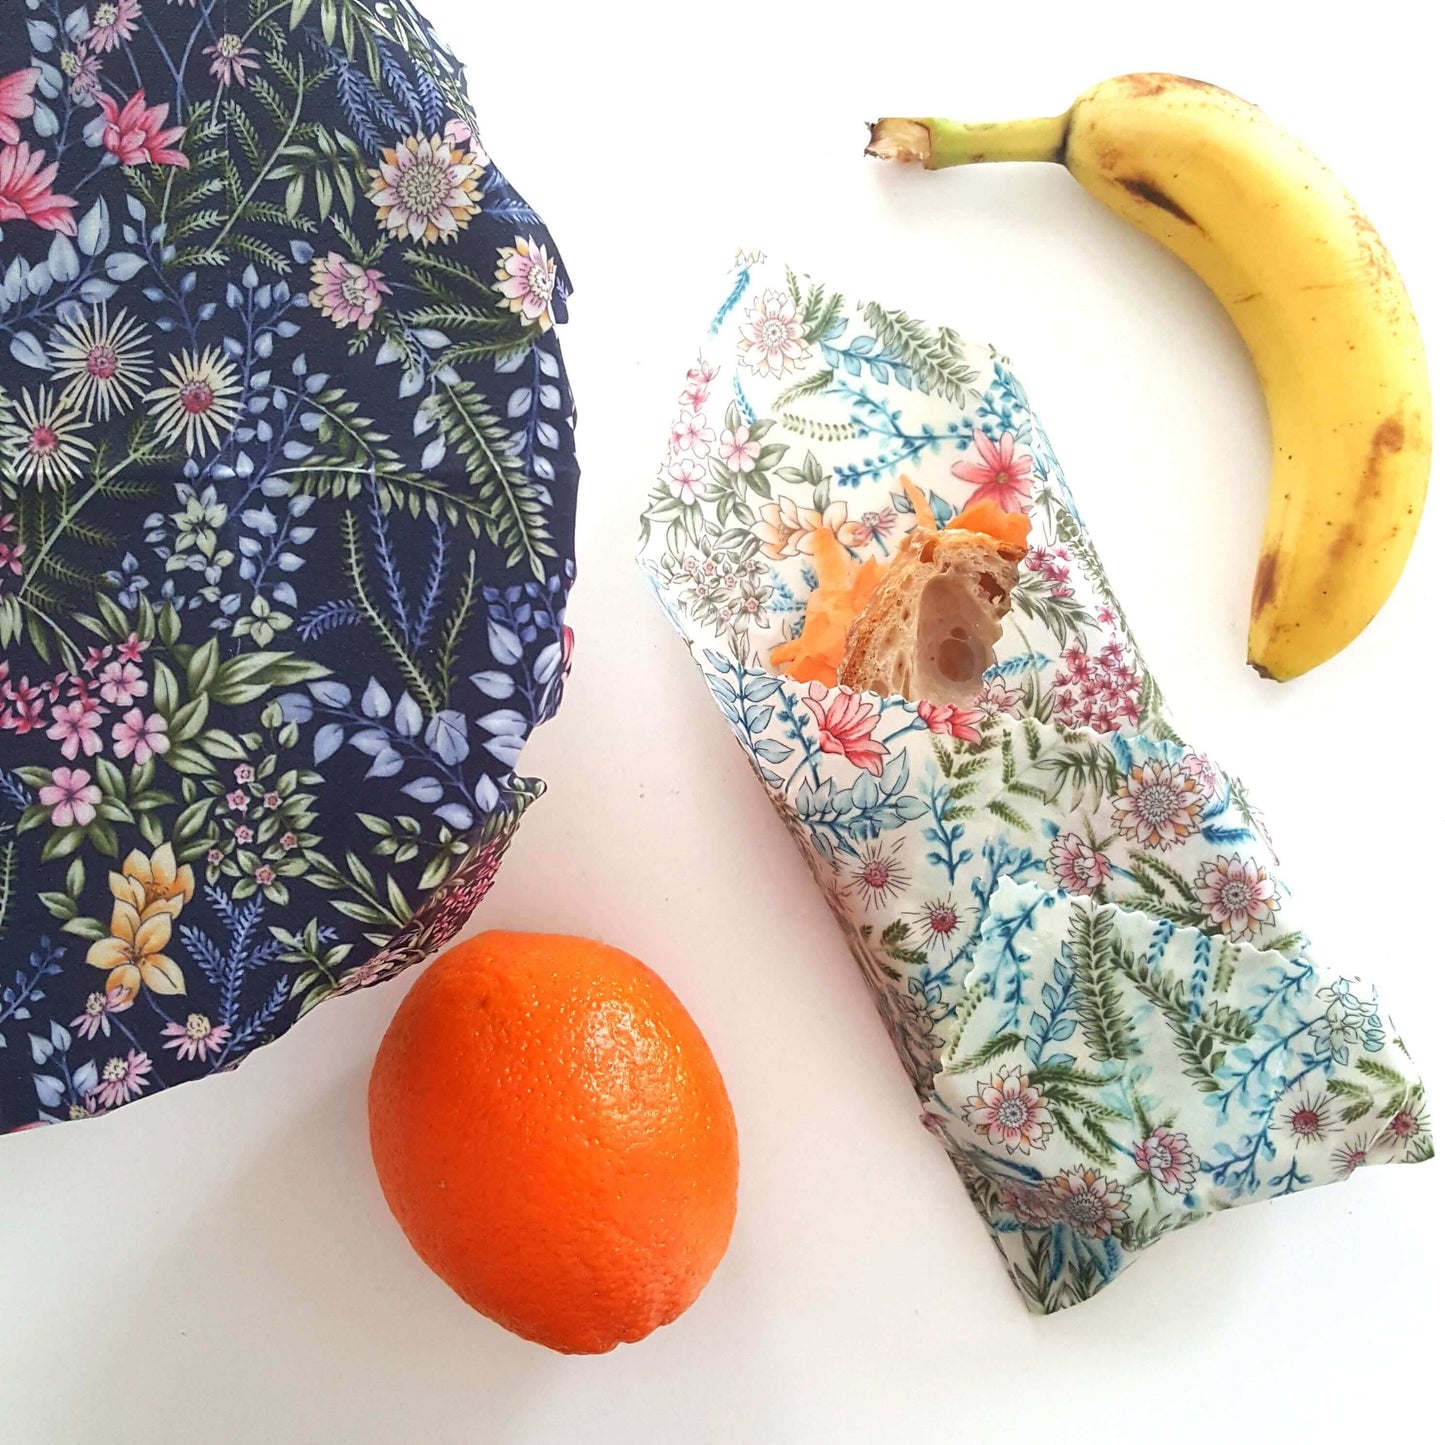 Reusable Beeswax Food Wraps 100% Hand Made in the UK by Honey Bee Good. Earth Kind Classic set of 3 in Botanical flatlay